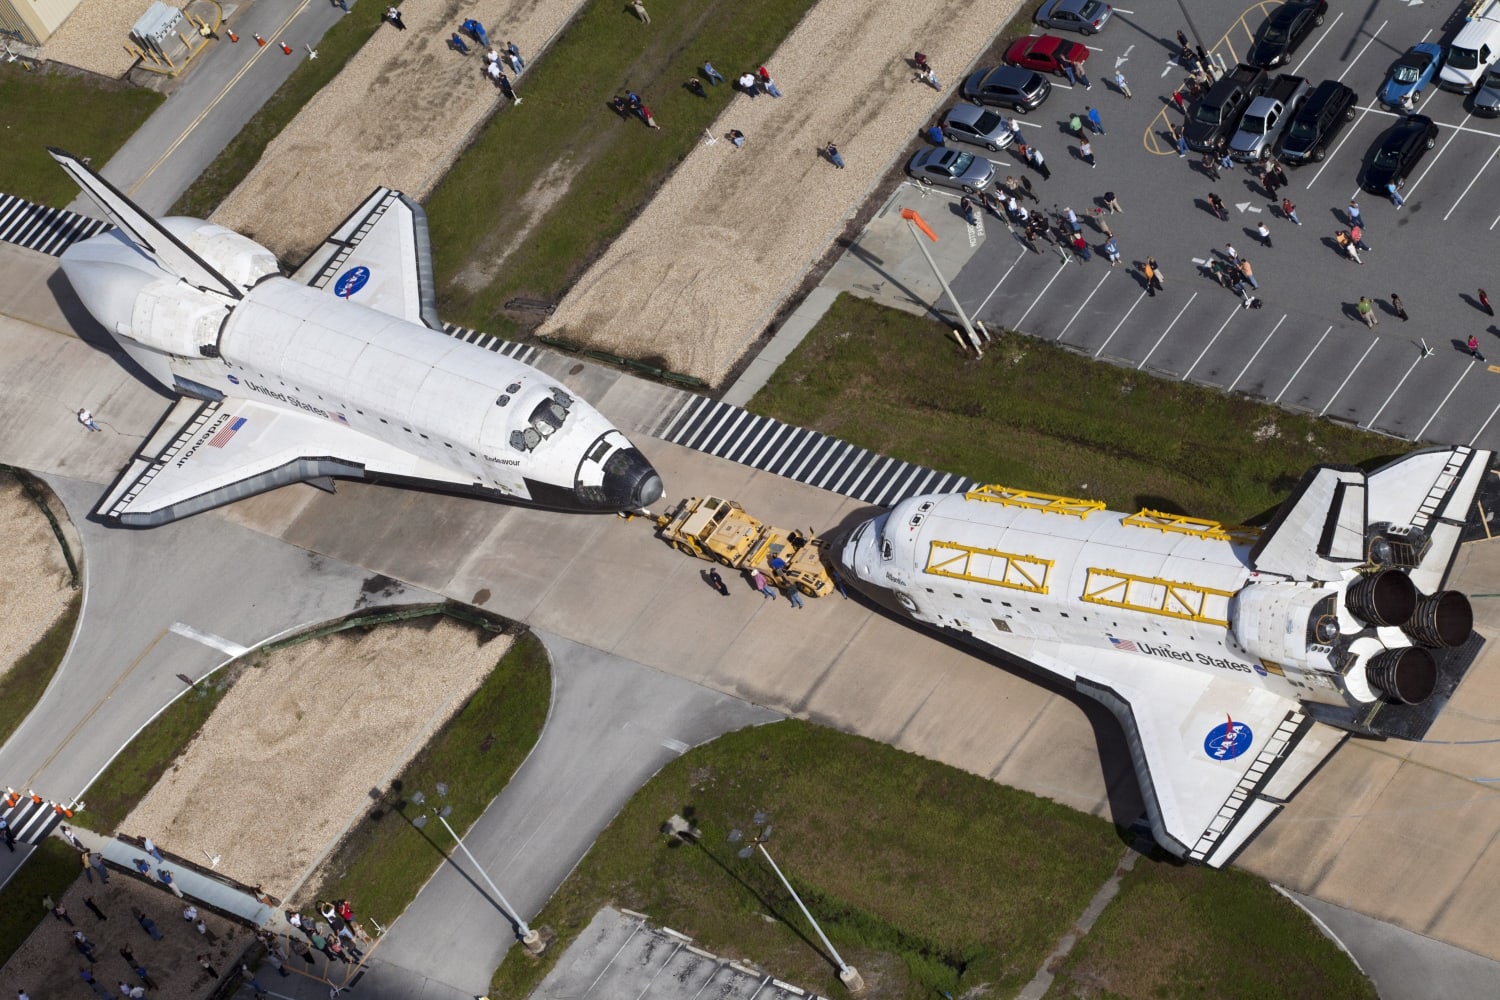 NASA's Space Shuttle Endeavour (left) and NASA's Space Shuttle Atlantis (right) "are parked nose-to-nose for a brief photo opportunity" on 16 August 2012. "The shuttles are switching locations" at John F. Kennedy Space Center in Florida, United States of America. Photographer: Frankie Martin, NASA